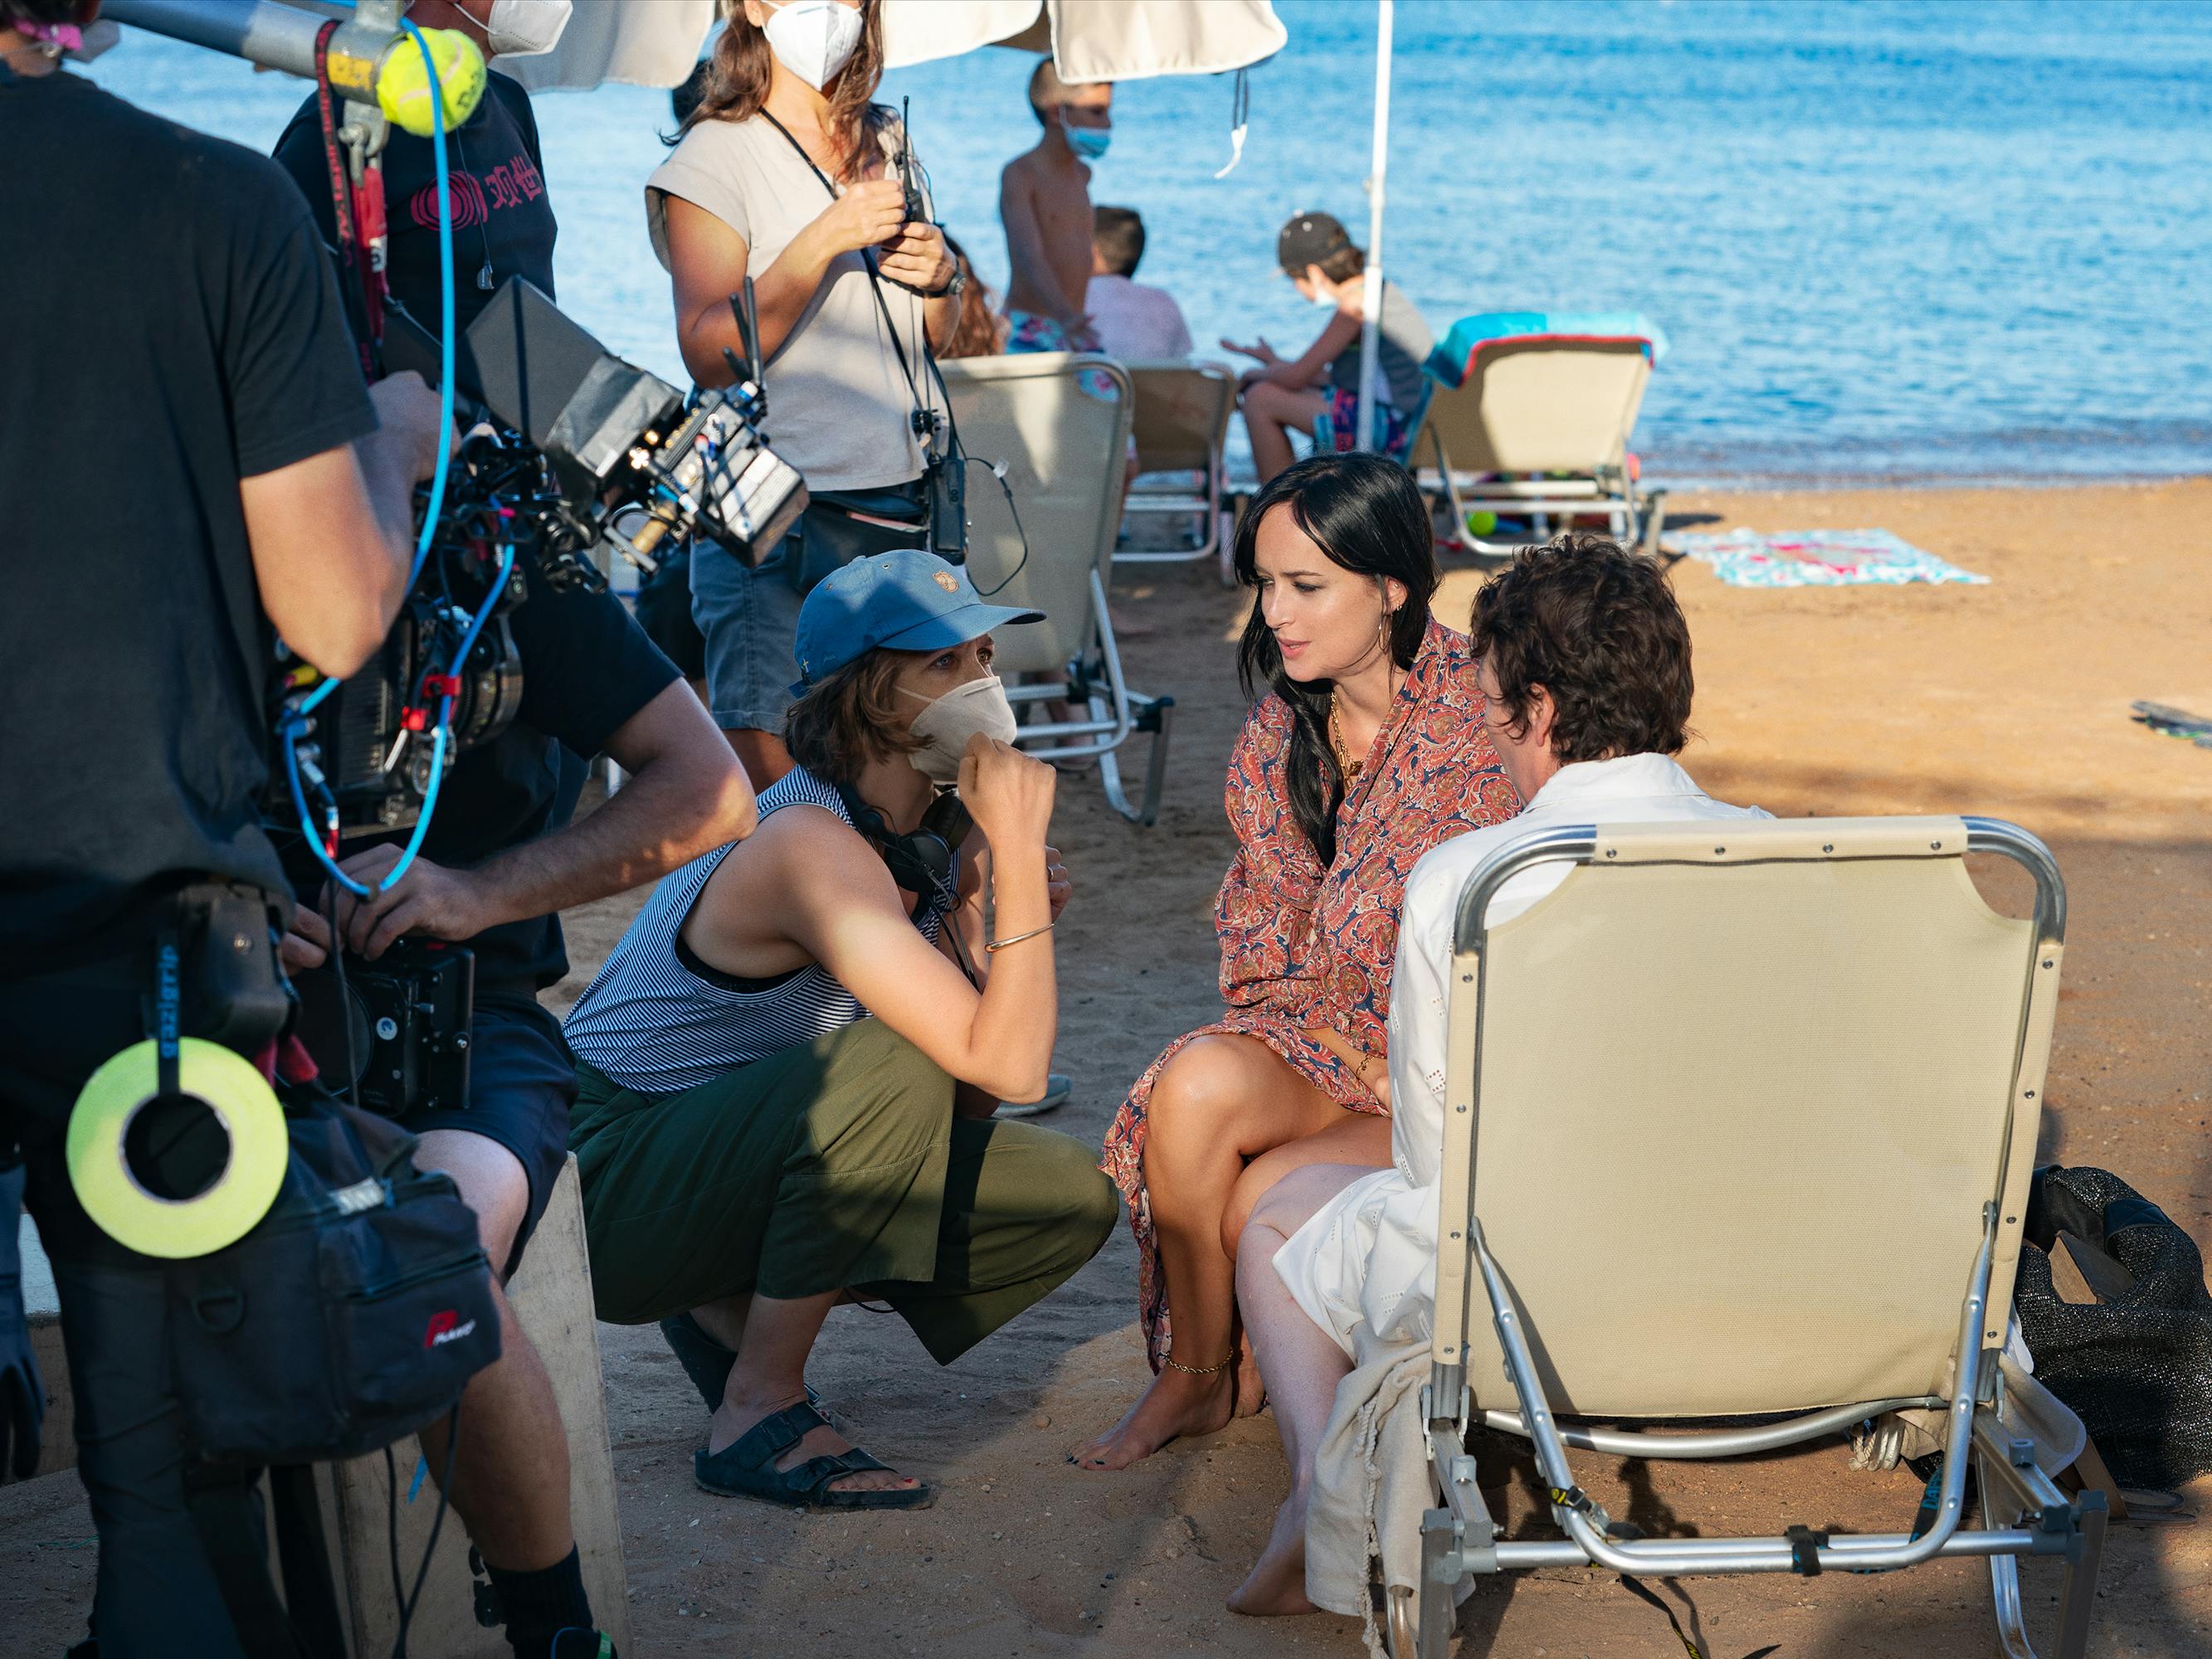 Maggie Gyllenhaal, Dakota Johnson, Olivia Colman, and The Lost Daughter crew sit on the beach. The water is a clear blue, the beach chair is creme. Colman wears a white robe, Johnson wears a red patterned shawl, and Gyllenhaal wears a blue hat and matching blue tank top. 